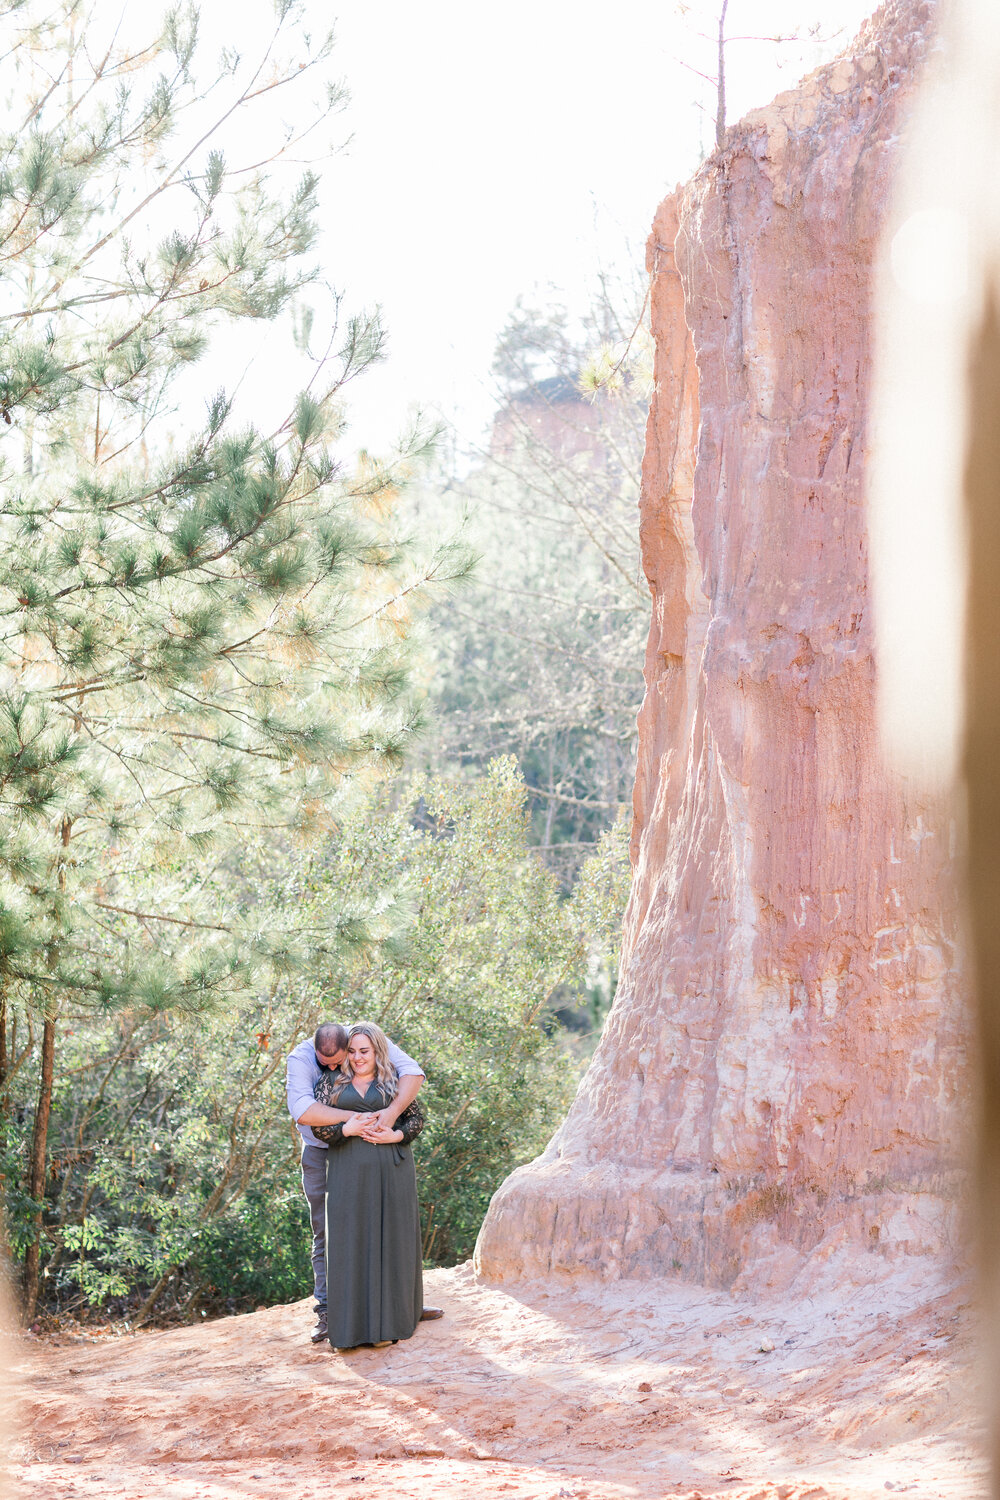 christina and aaron engagement darian reilly photography-56.jpg